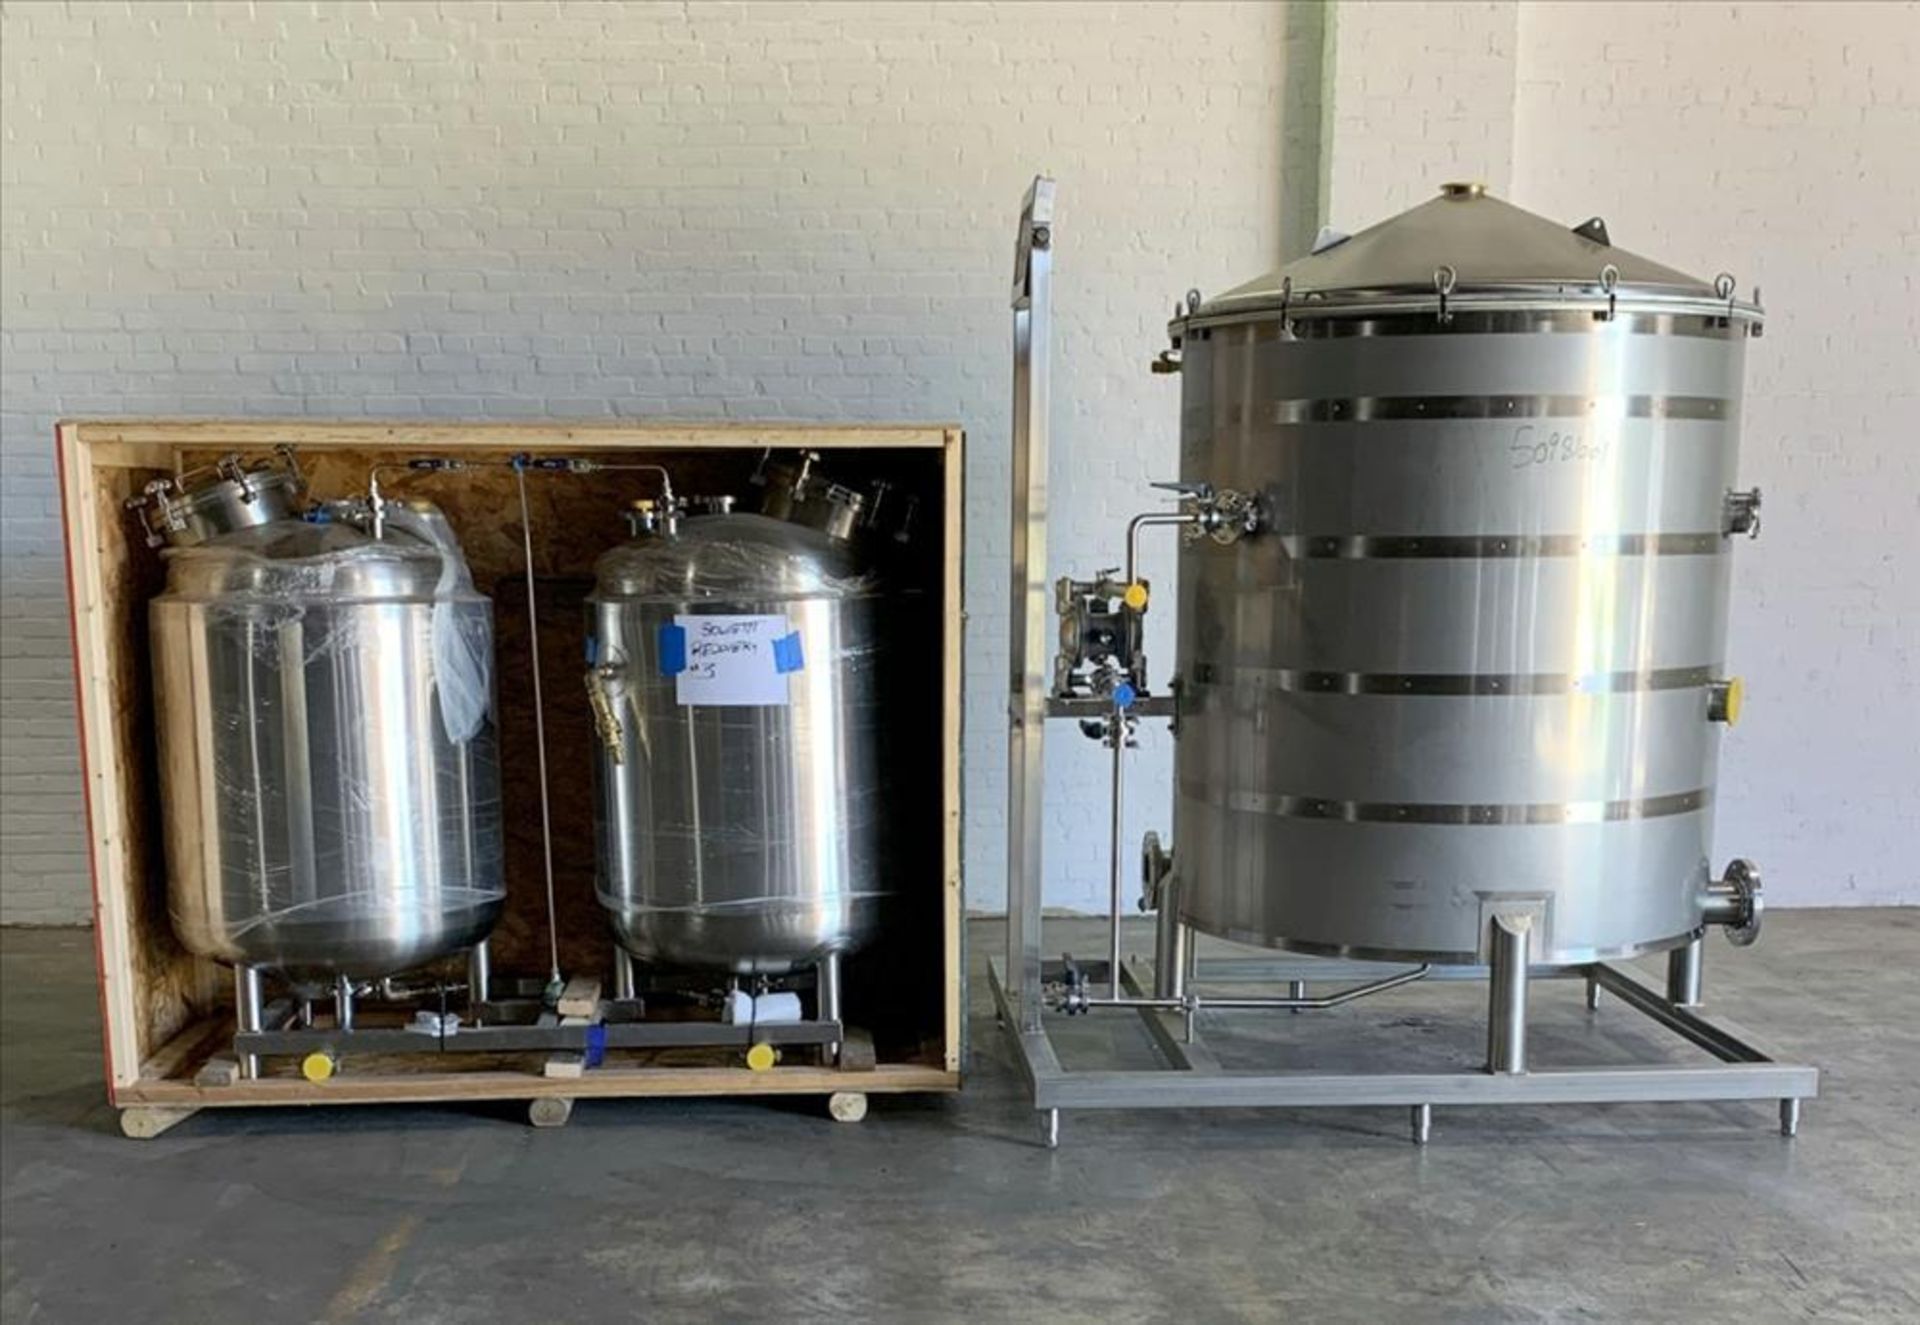 UNUSED - New In Crates - Eden Labs 3-Circuit Ethanol Platform Extraction & Solvent Recovery System - Image 17 of 152